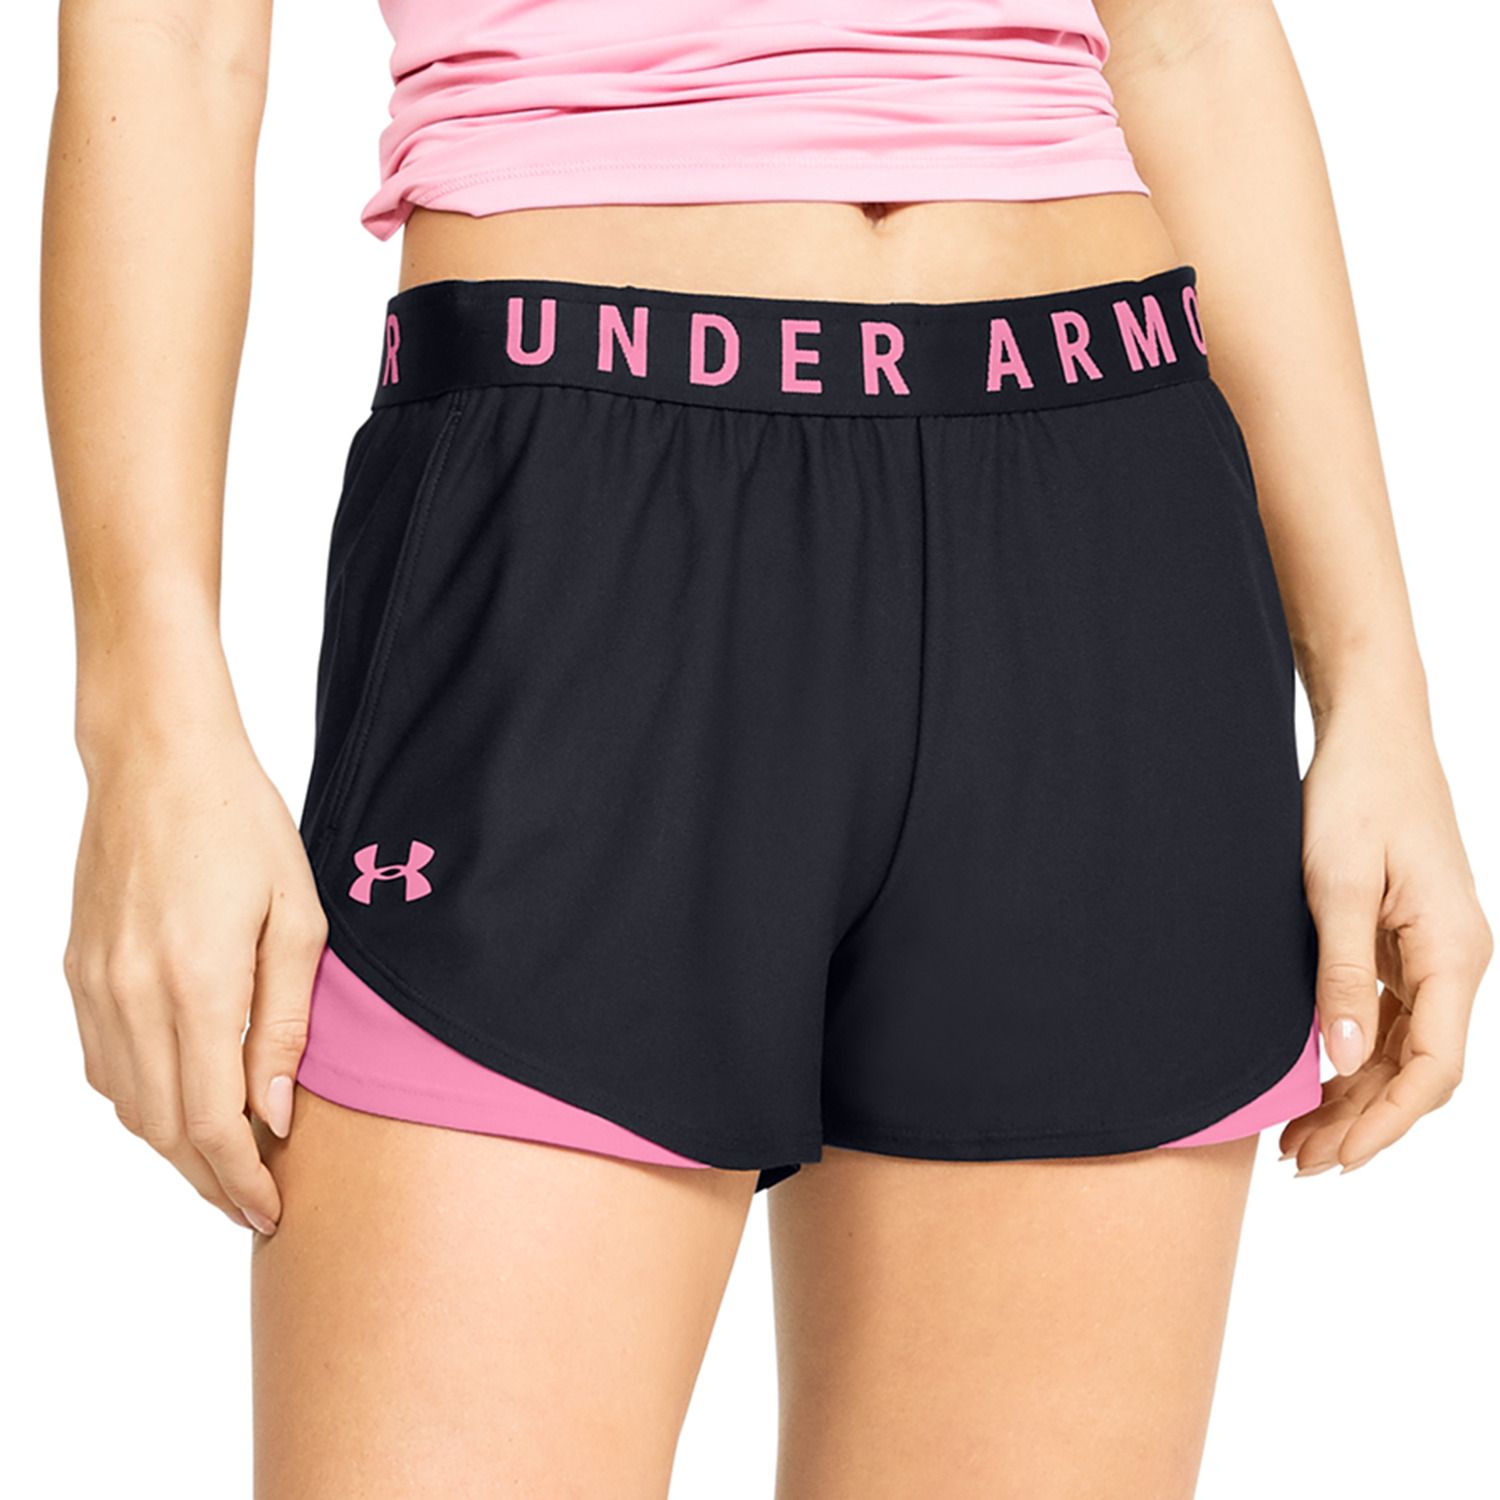 Women's Under Armour Shorts: Shop for 